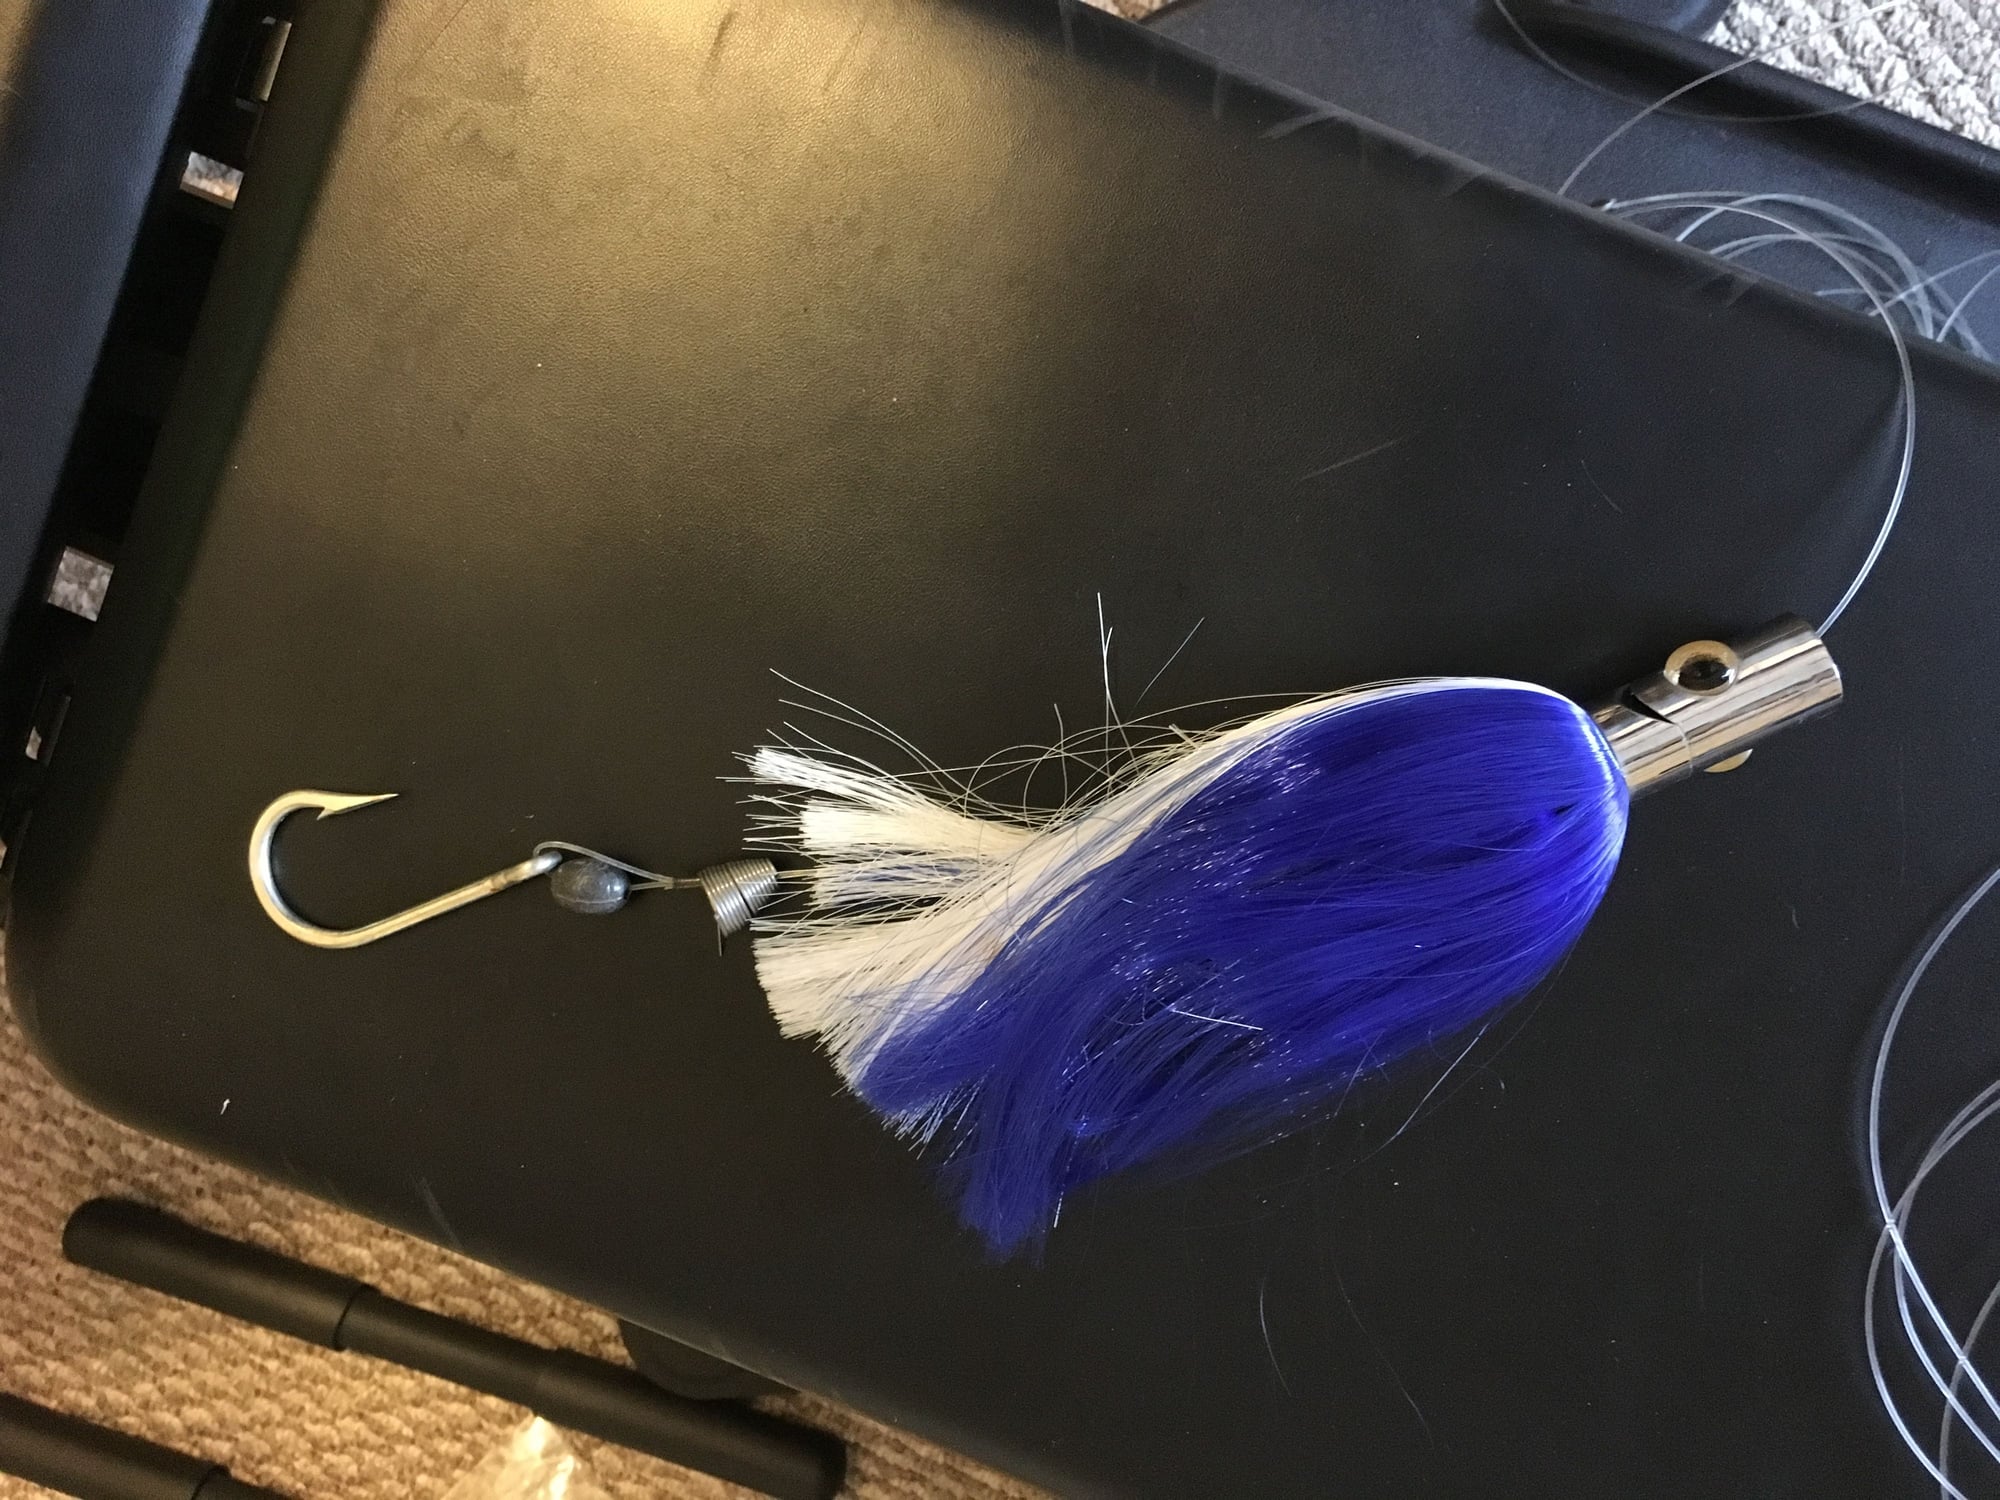 hooking live bait w/ rubber band? - The Hull Truth - Boating and Fishing  Forum